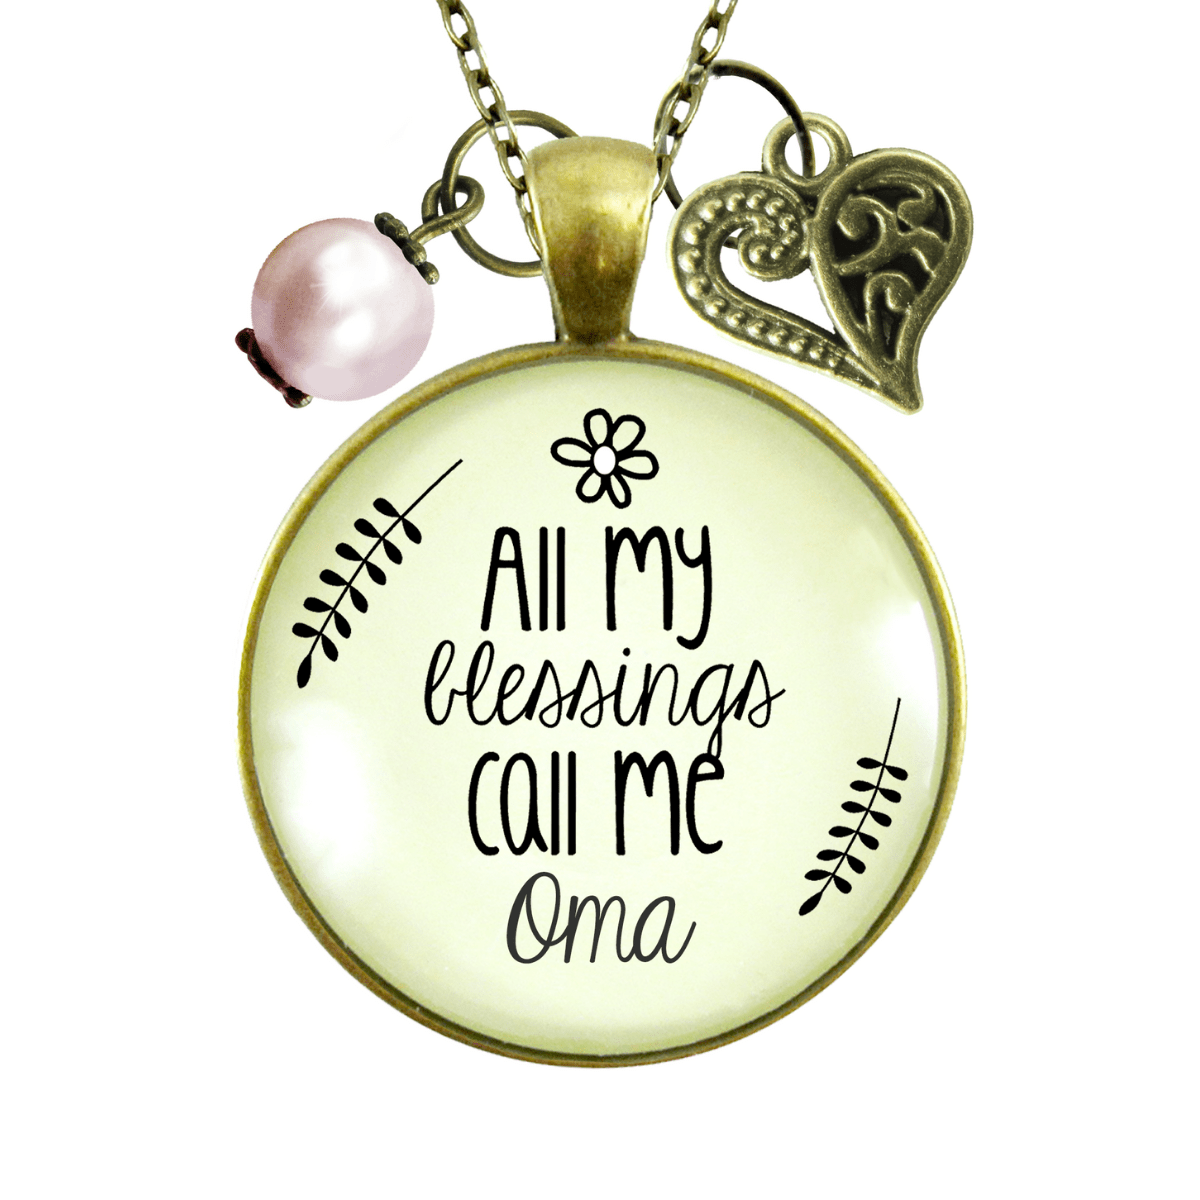 Gutsy Goodness Oma Necklace All My Blessings German Grandma Womens Family Gift Jewelry - Gutsy Goodness Handmade Jewelry;Oma Necklace All My Blessings German Grandma Womens Family Gift Jewelry - Gutsy Goodness Handmade Jewelry Gifts